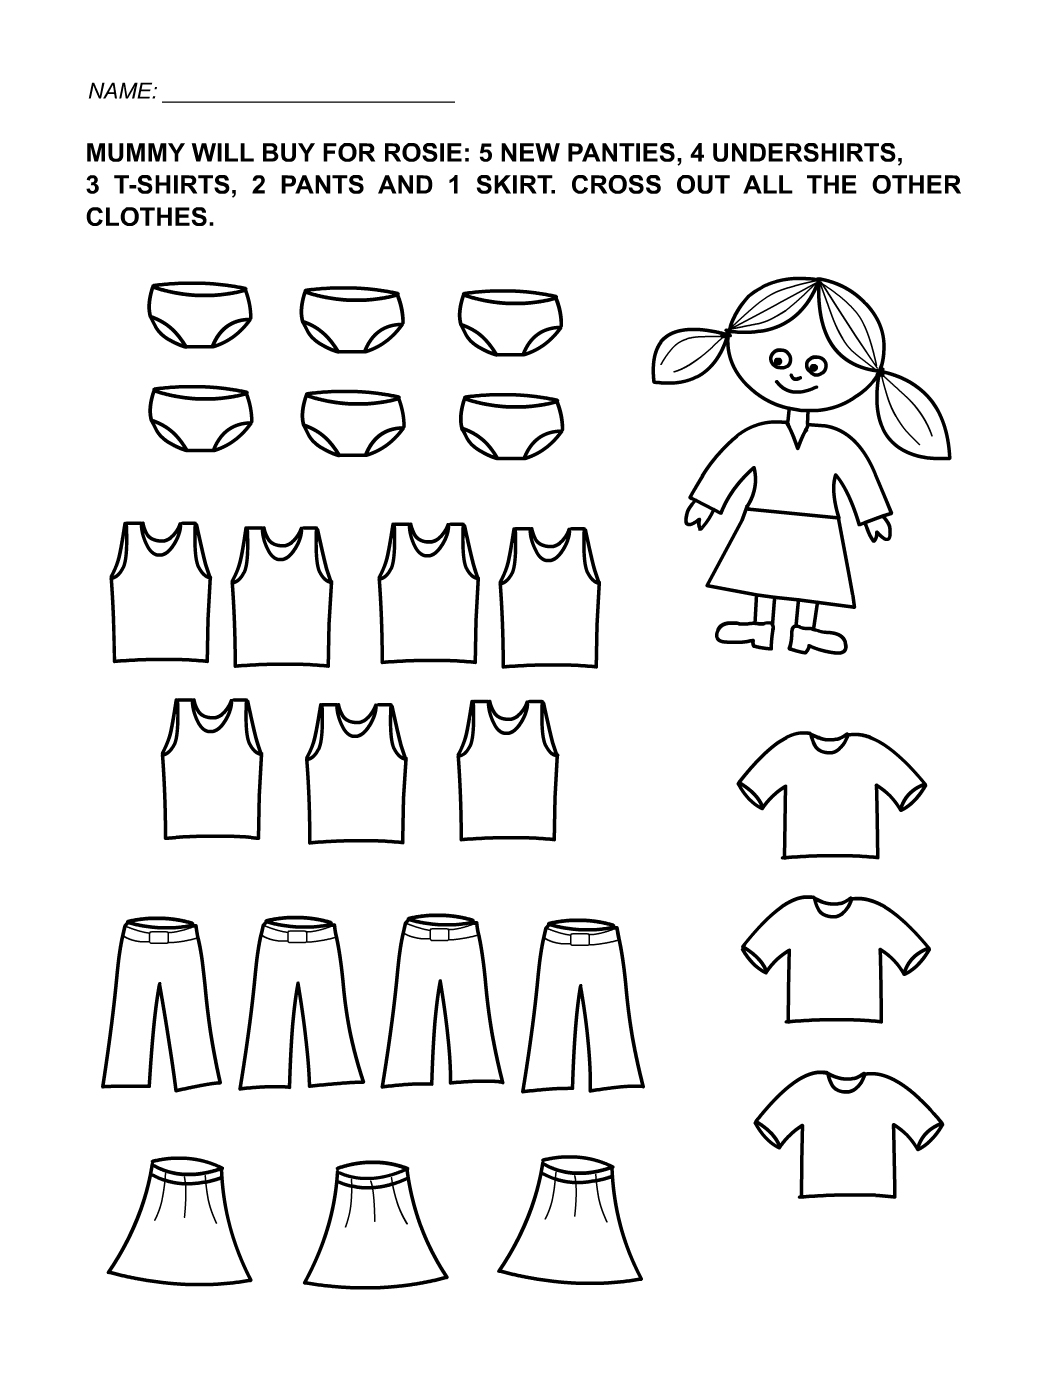 Free Printable Toddler Worksheets – With Preschool Also Grade 1 - Free Printable Toddler Worksheets